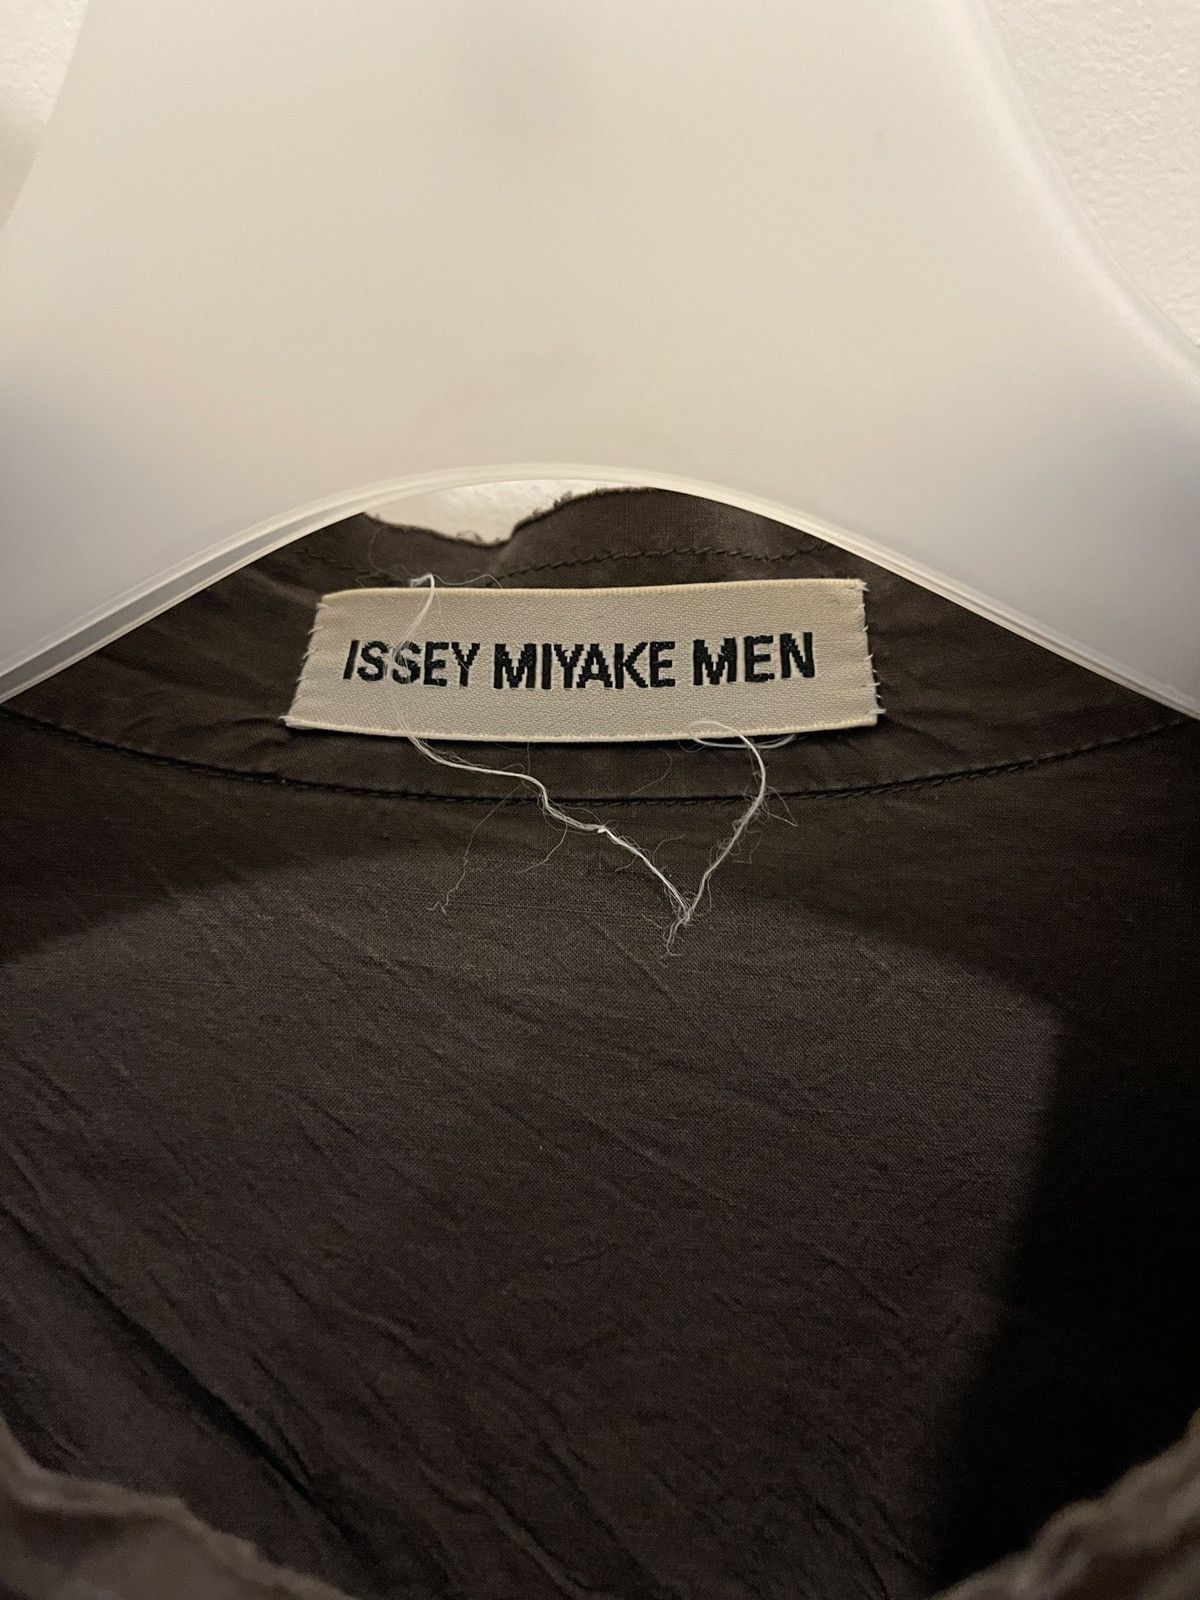 Issey Miyake Last Drop Vintage Raw Edge Stand Collar Overshirt Size US L / EU 52-54 / 3 - 2 Preview